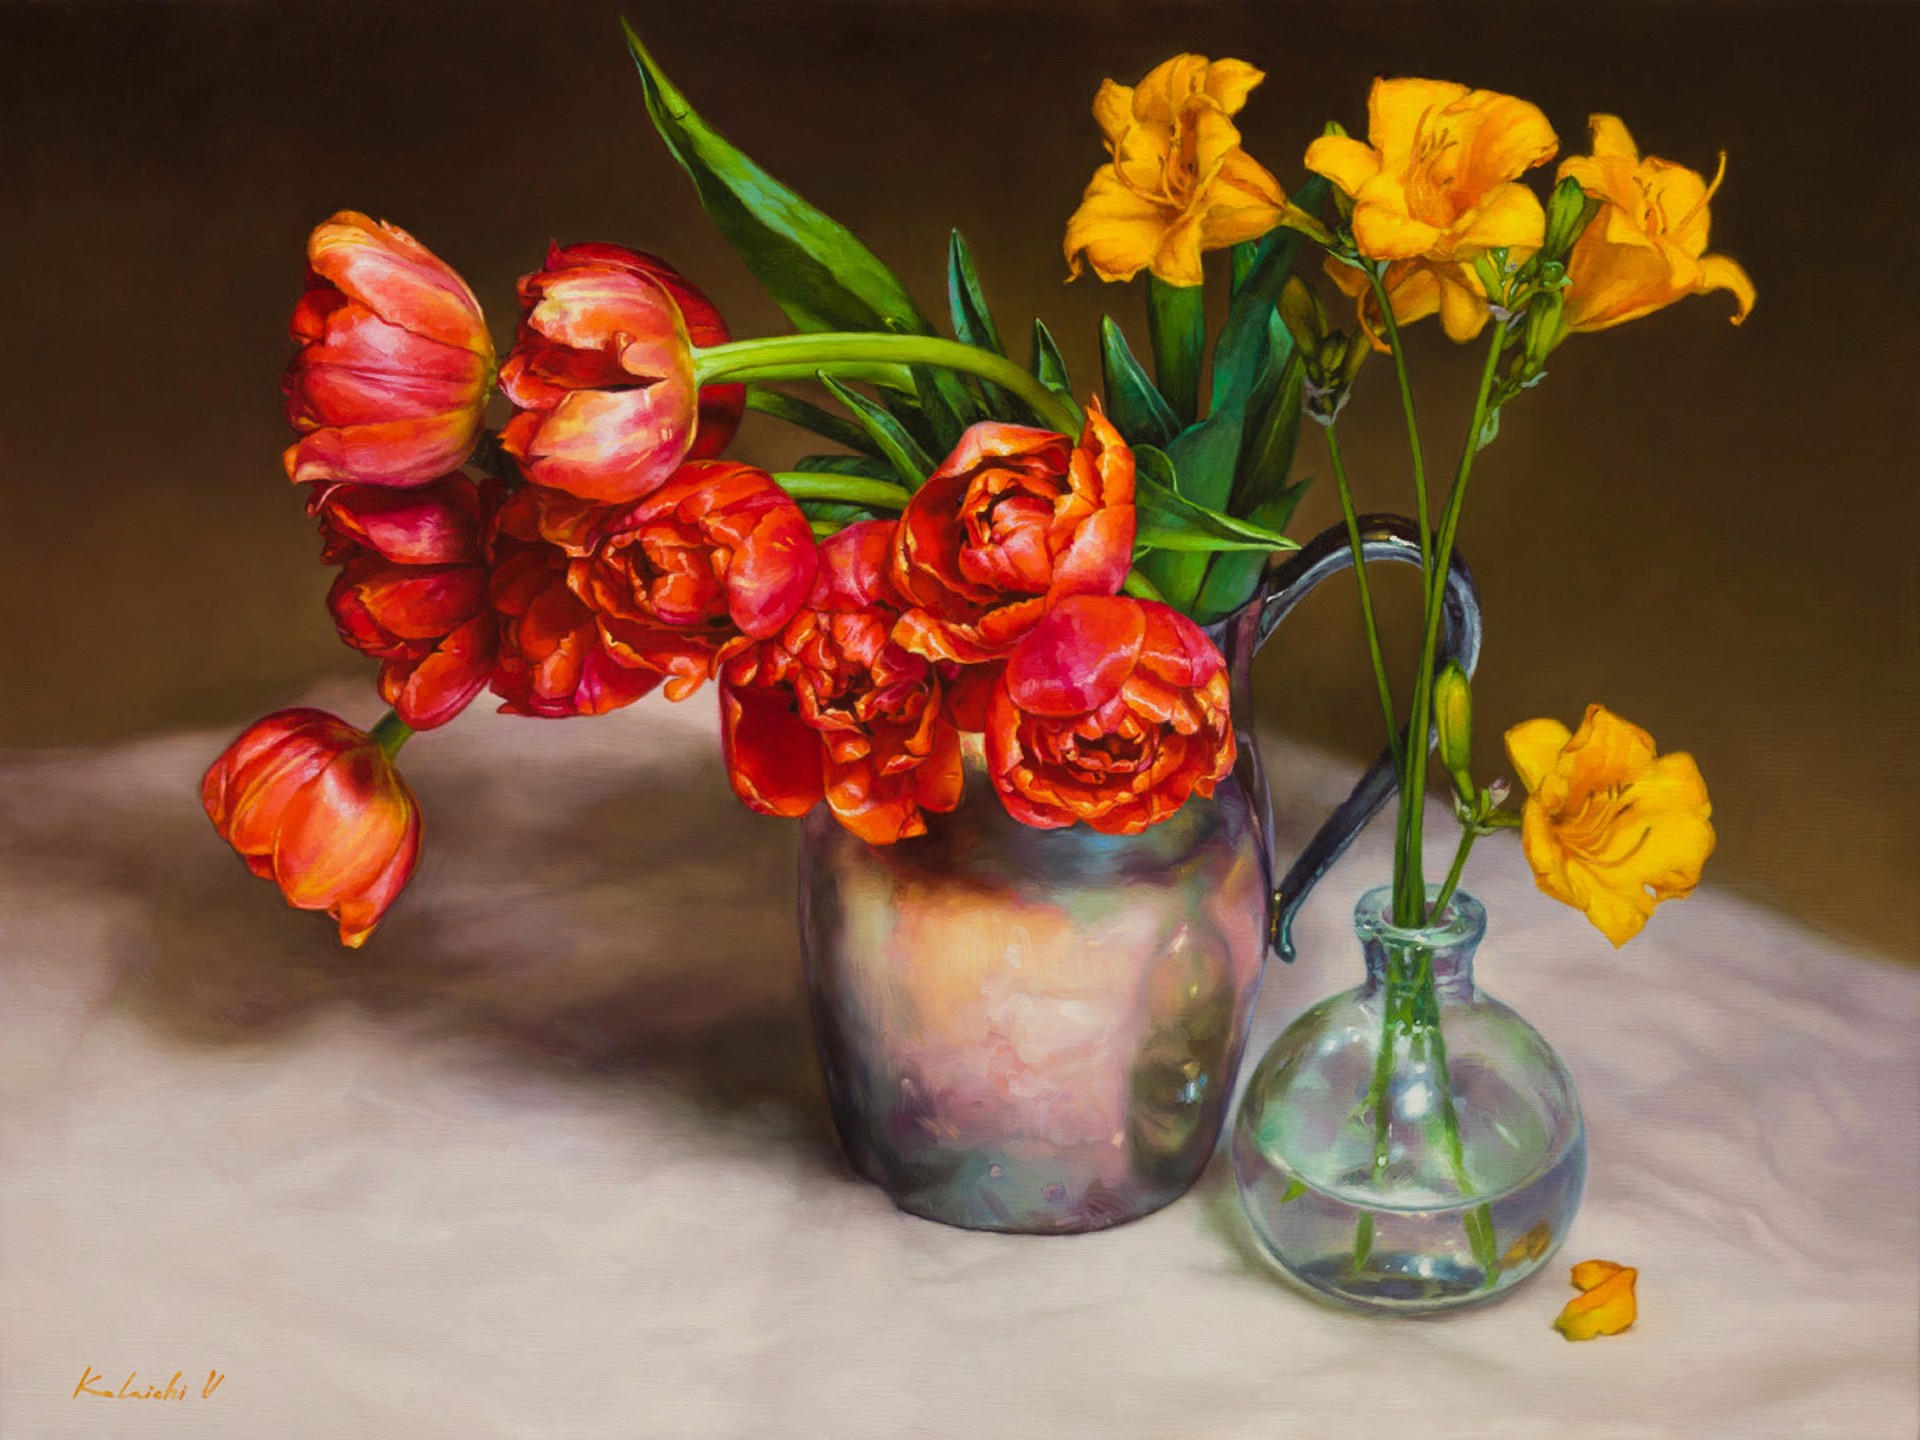 Beauty and Tenderness of Tulips by Victoria Kalaichi